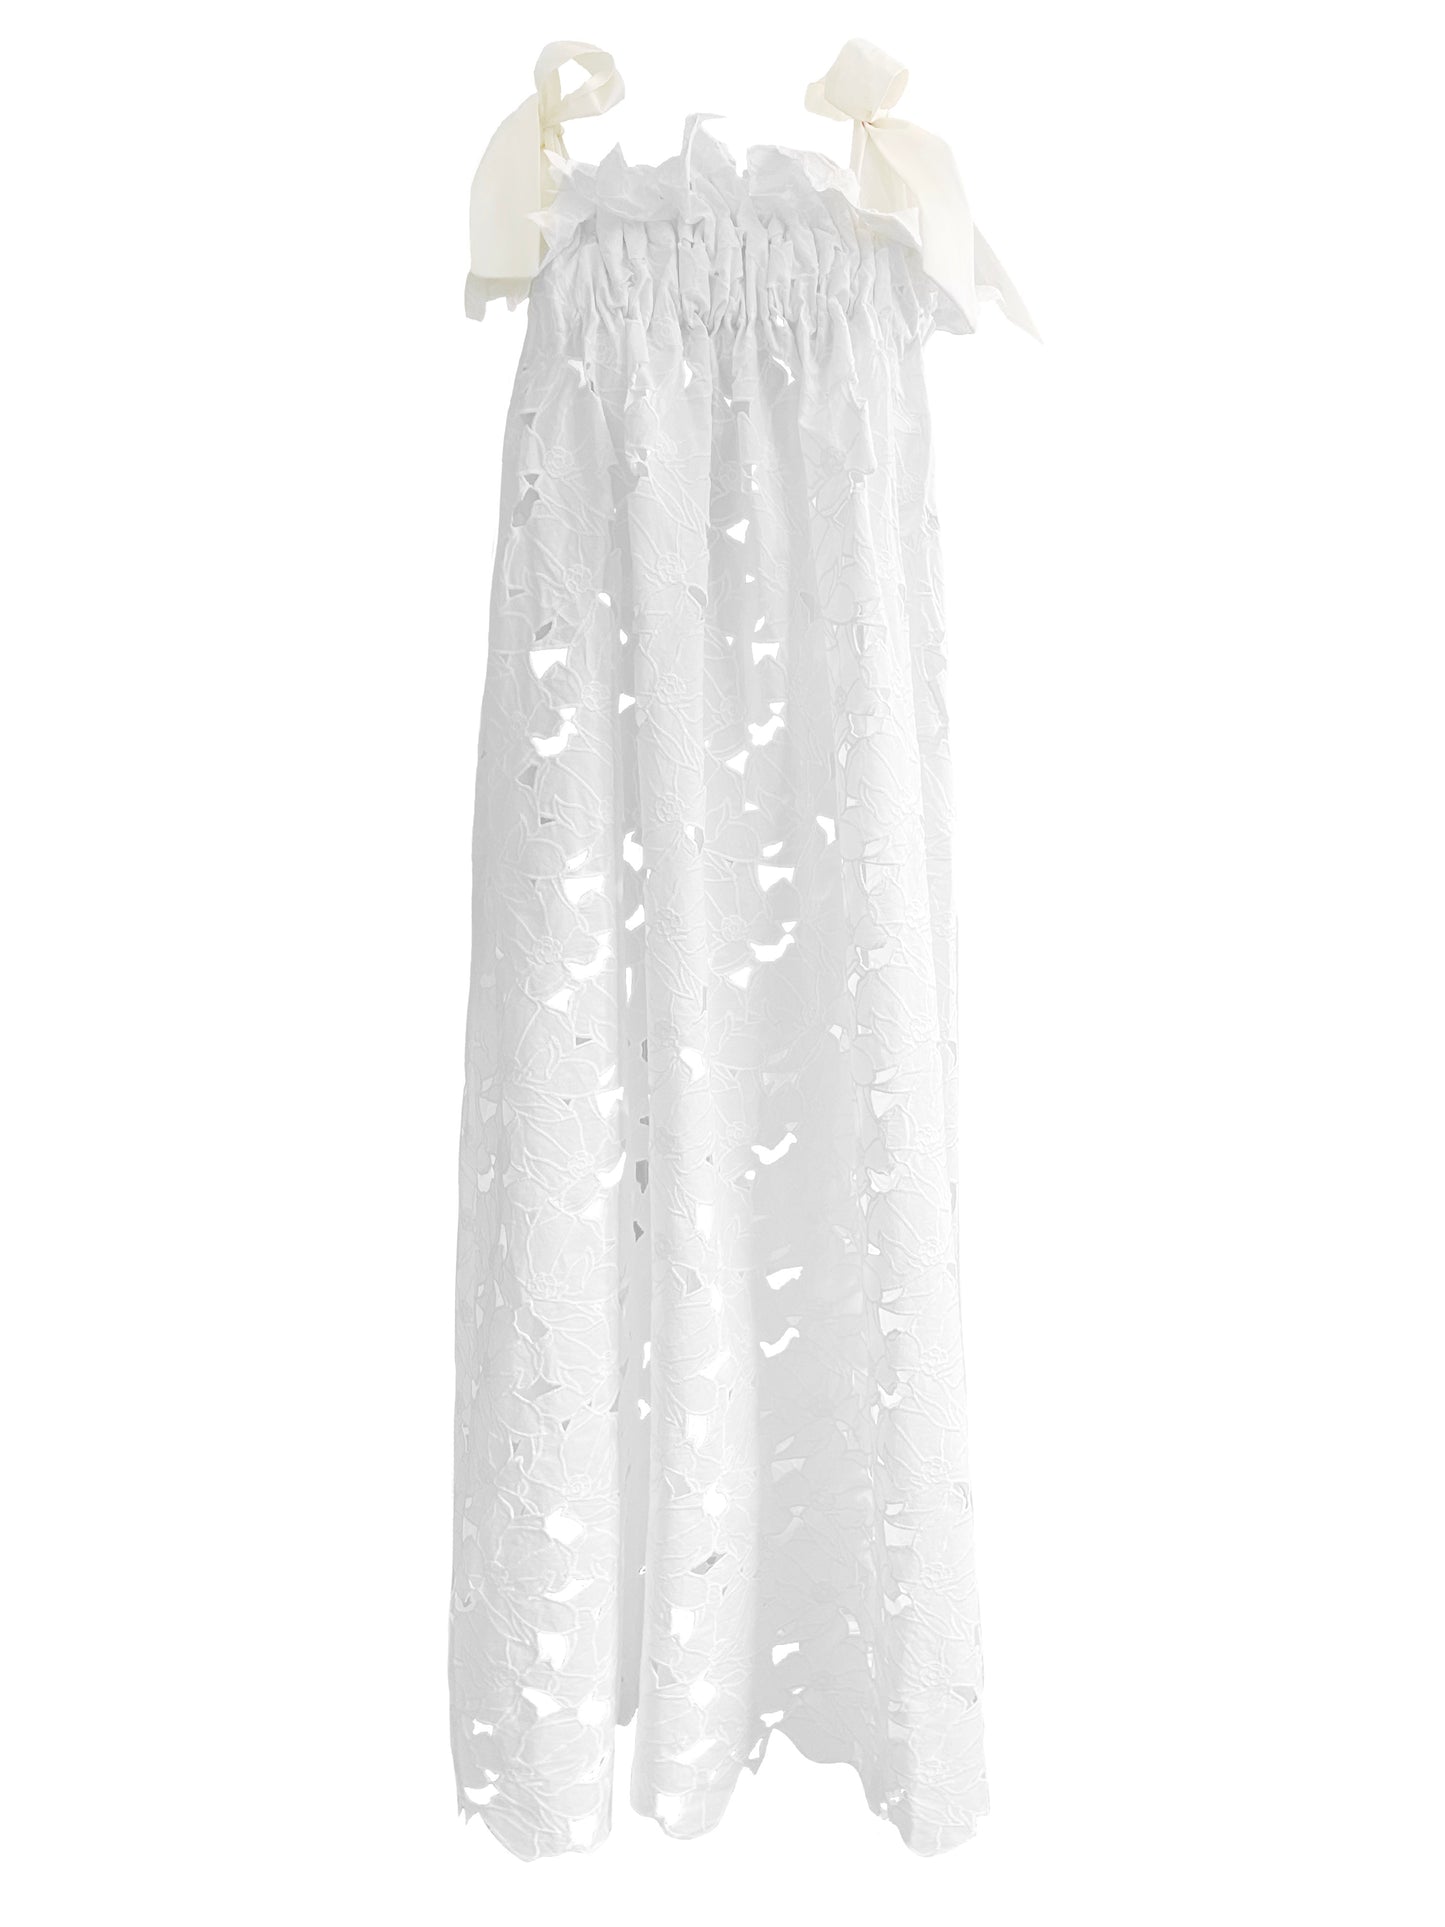 Jaime Dress in White Cotton Lace